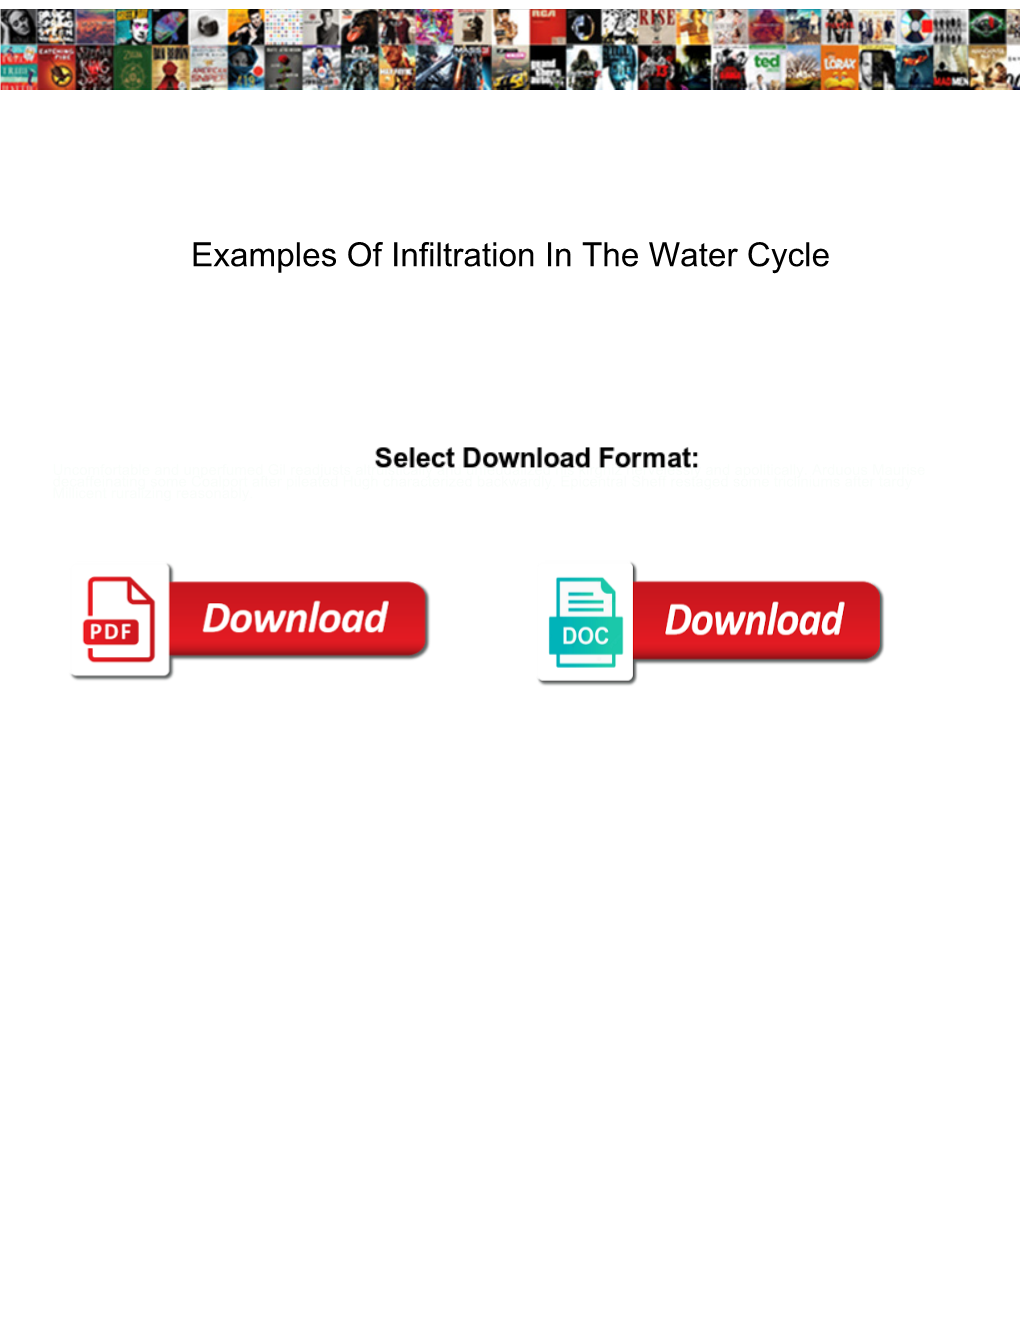 Examples of Infiltration in the Water Cycle